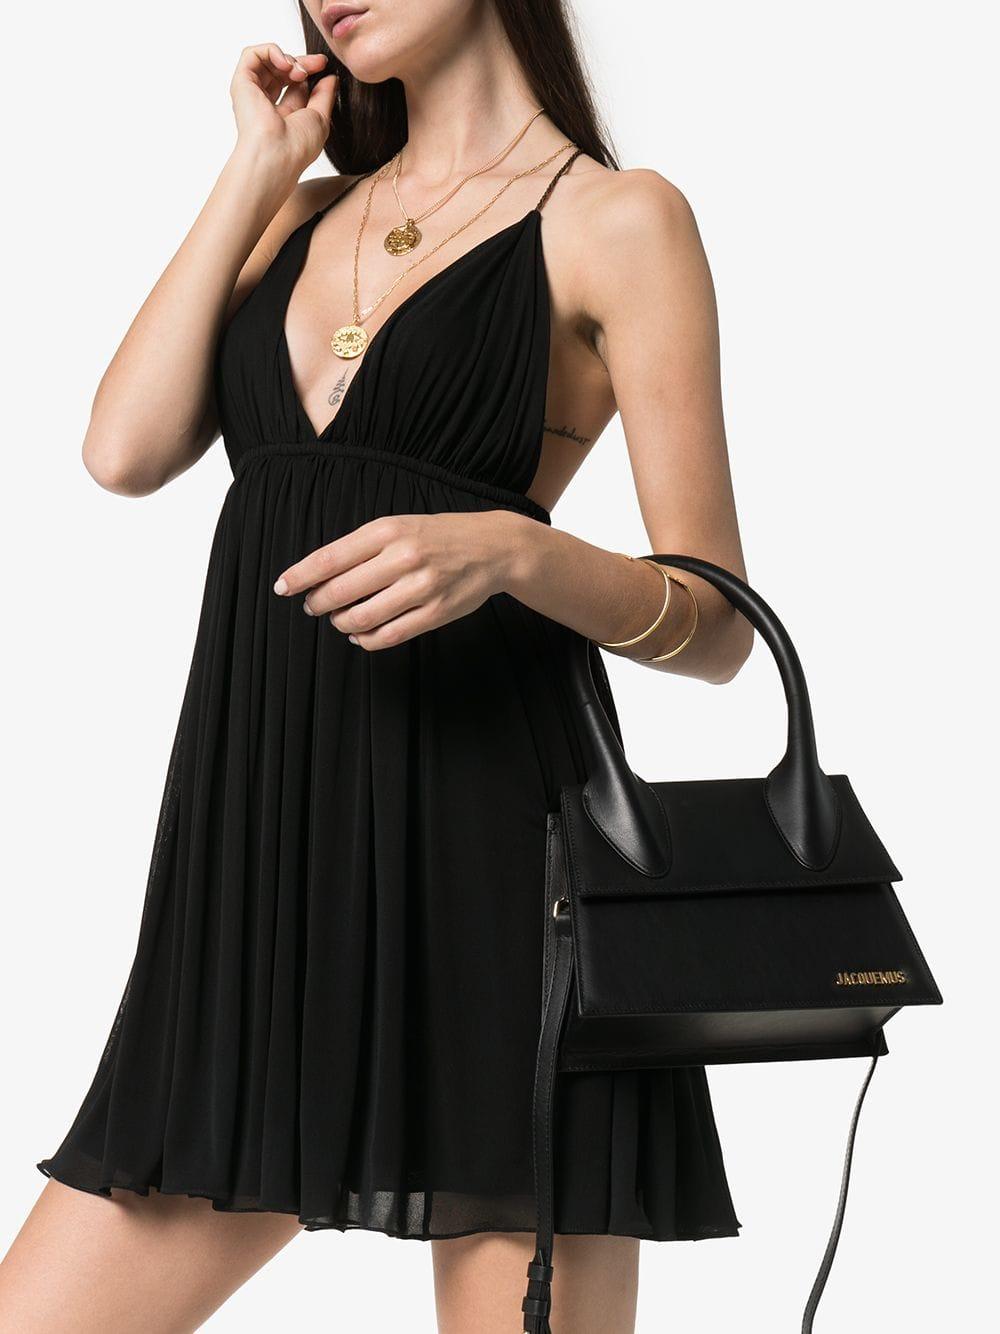 JACQUEMUS Le Chiquito Long Bag in Black